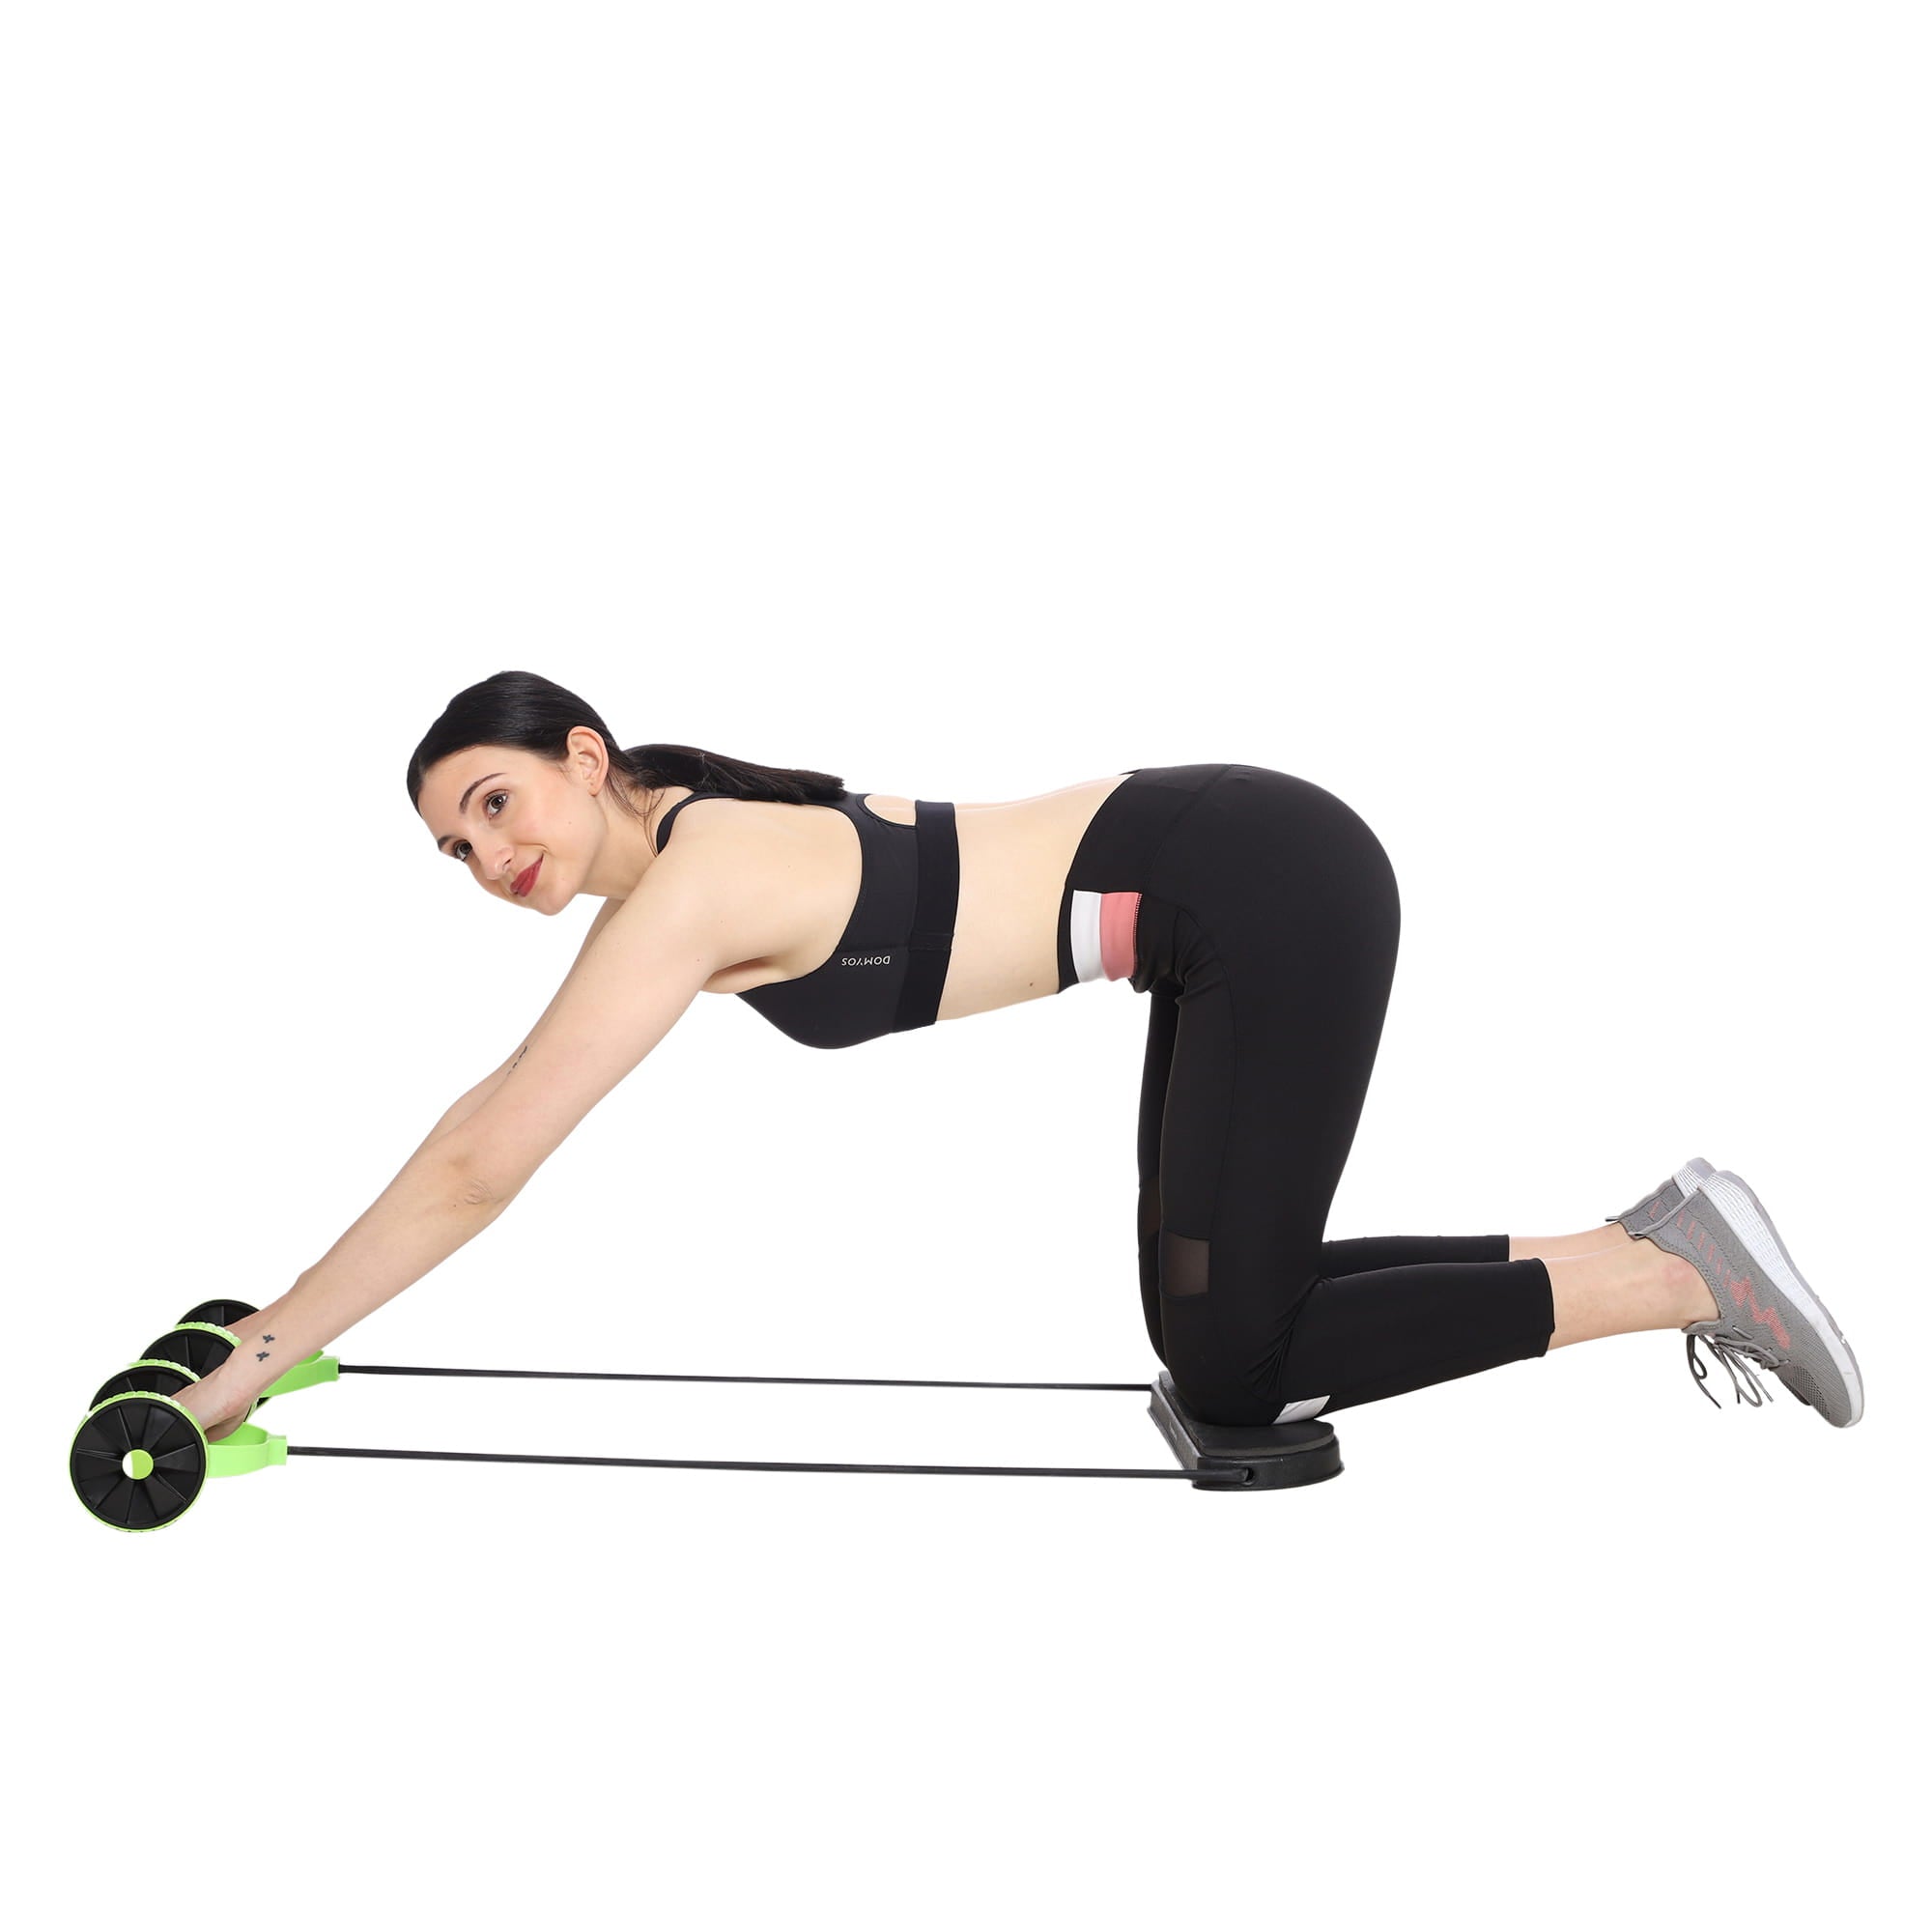 The Definitive Guide To Use Ab Roller - Benefits, Exercises & More –